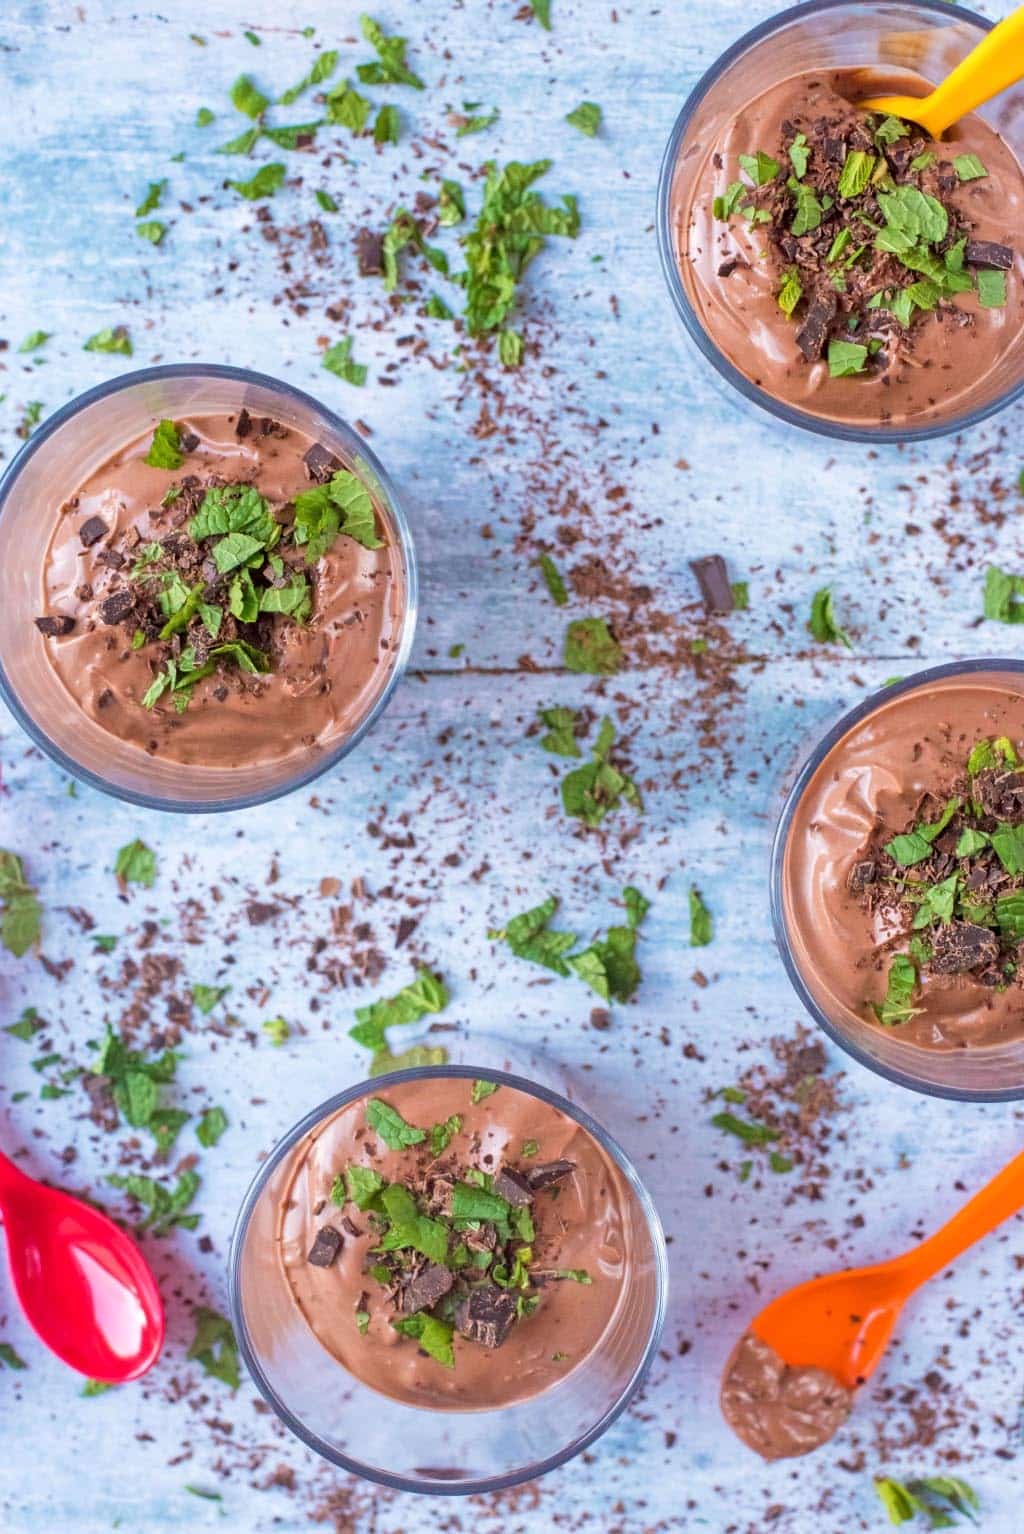 Four chocolate desserts topped with chocolate chunks and chopped mint leaves.